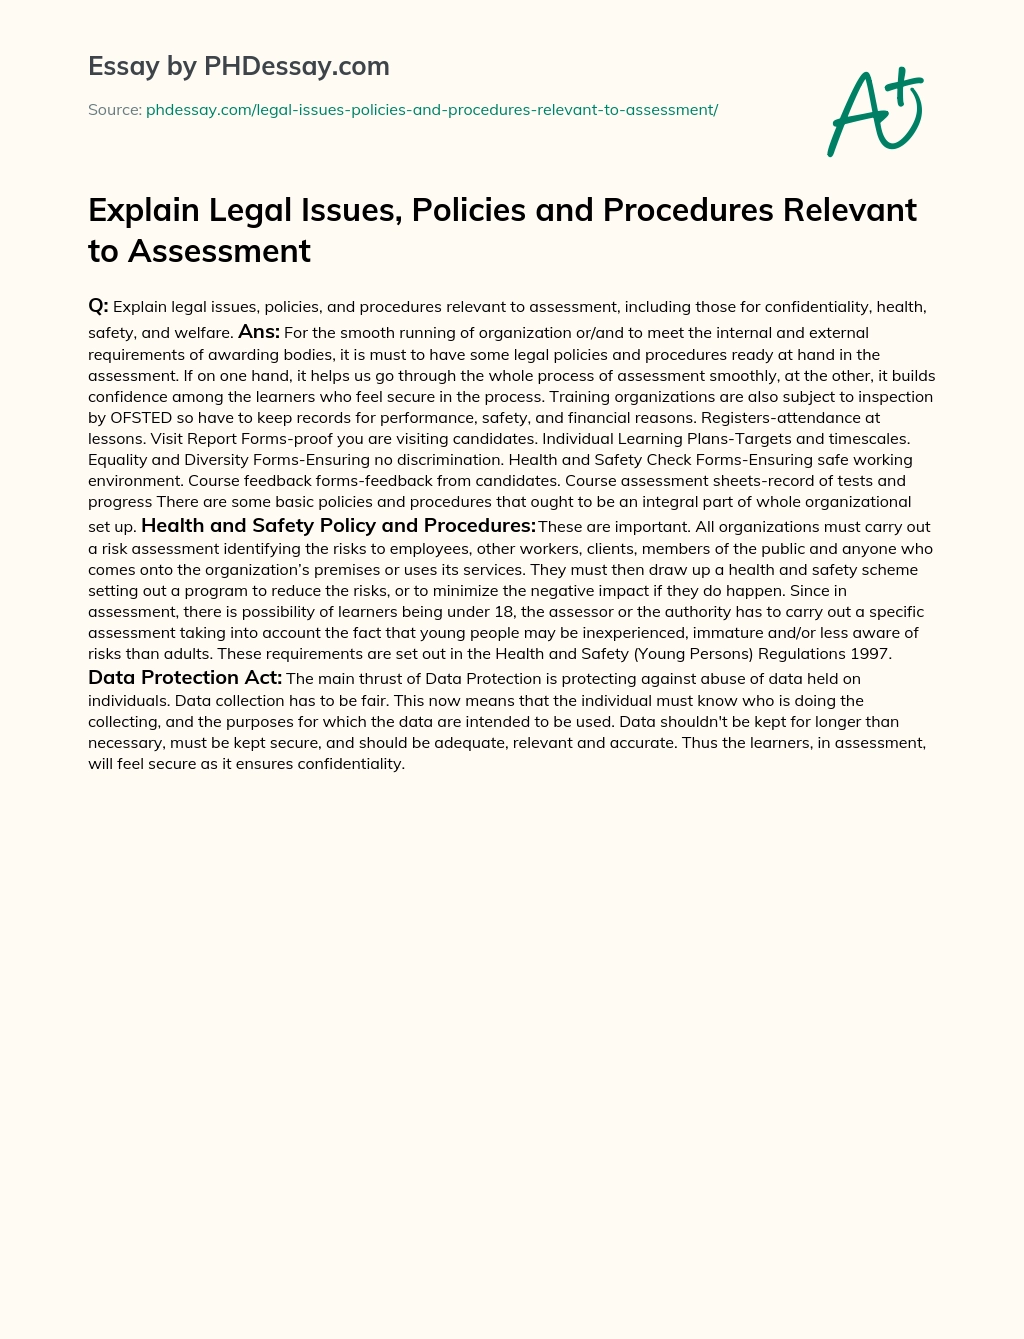 Explain Legal Issues, Policies and Procedures Relevant to Assessment essay